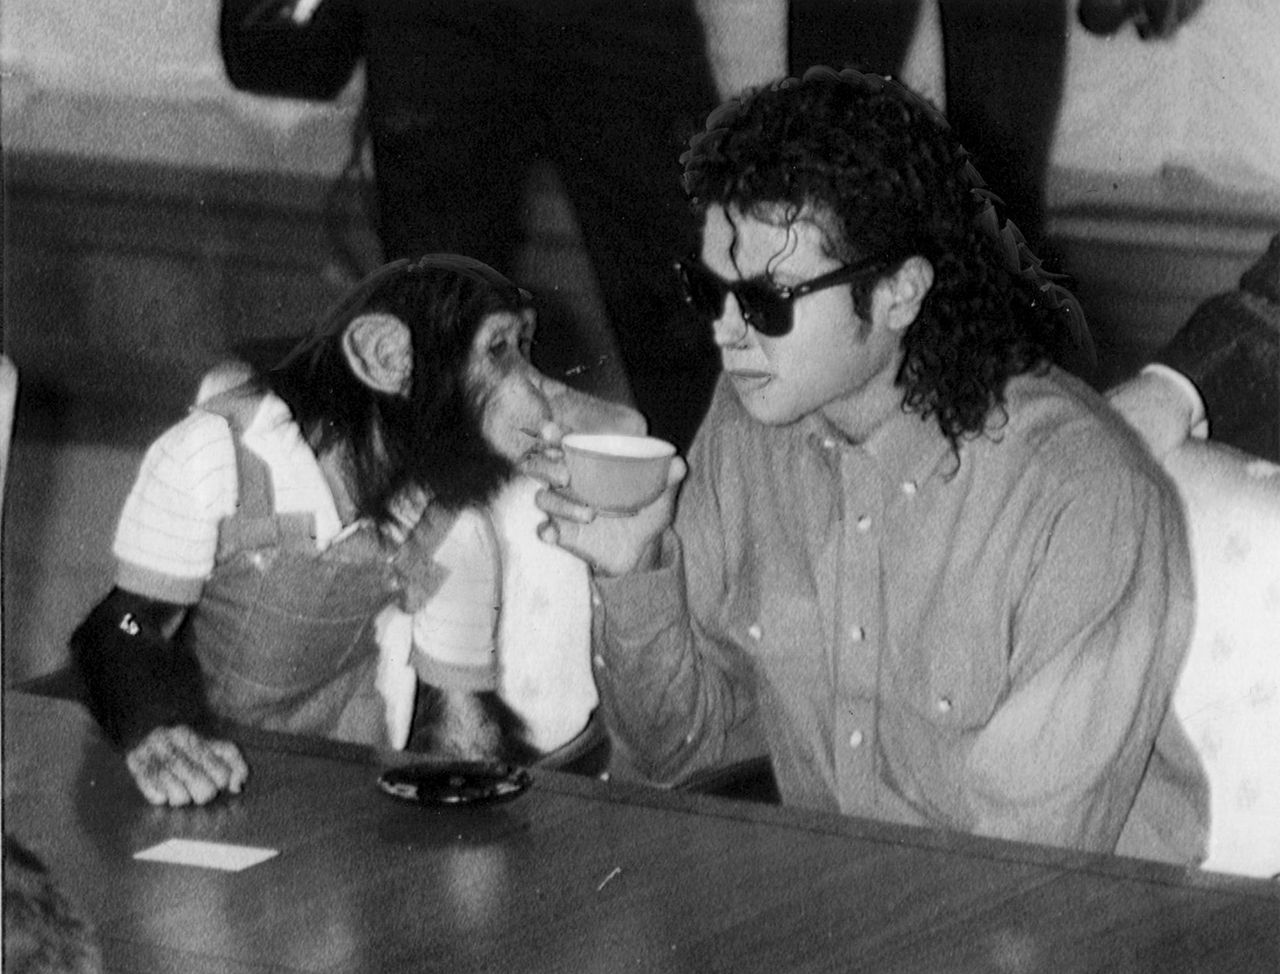 Michael Jackson had a monkey. See what happened to it after his death.